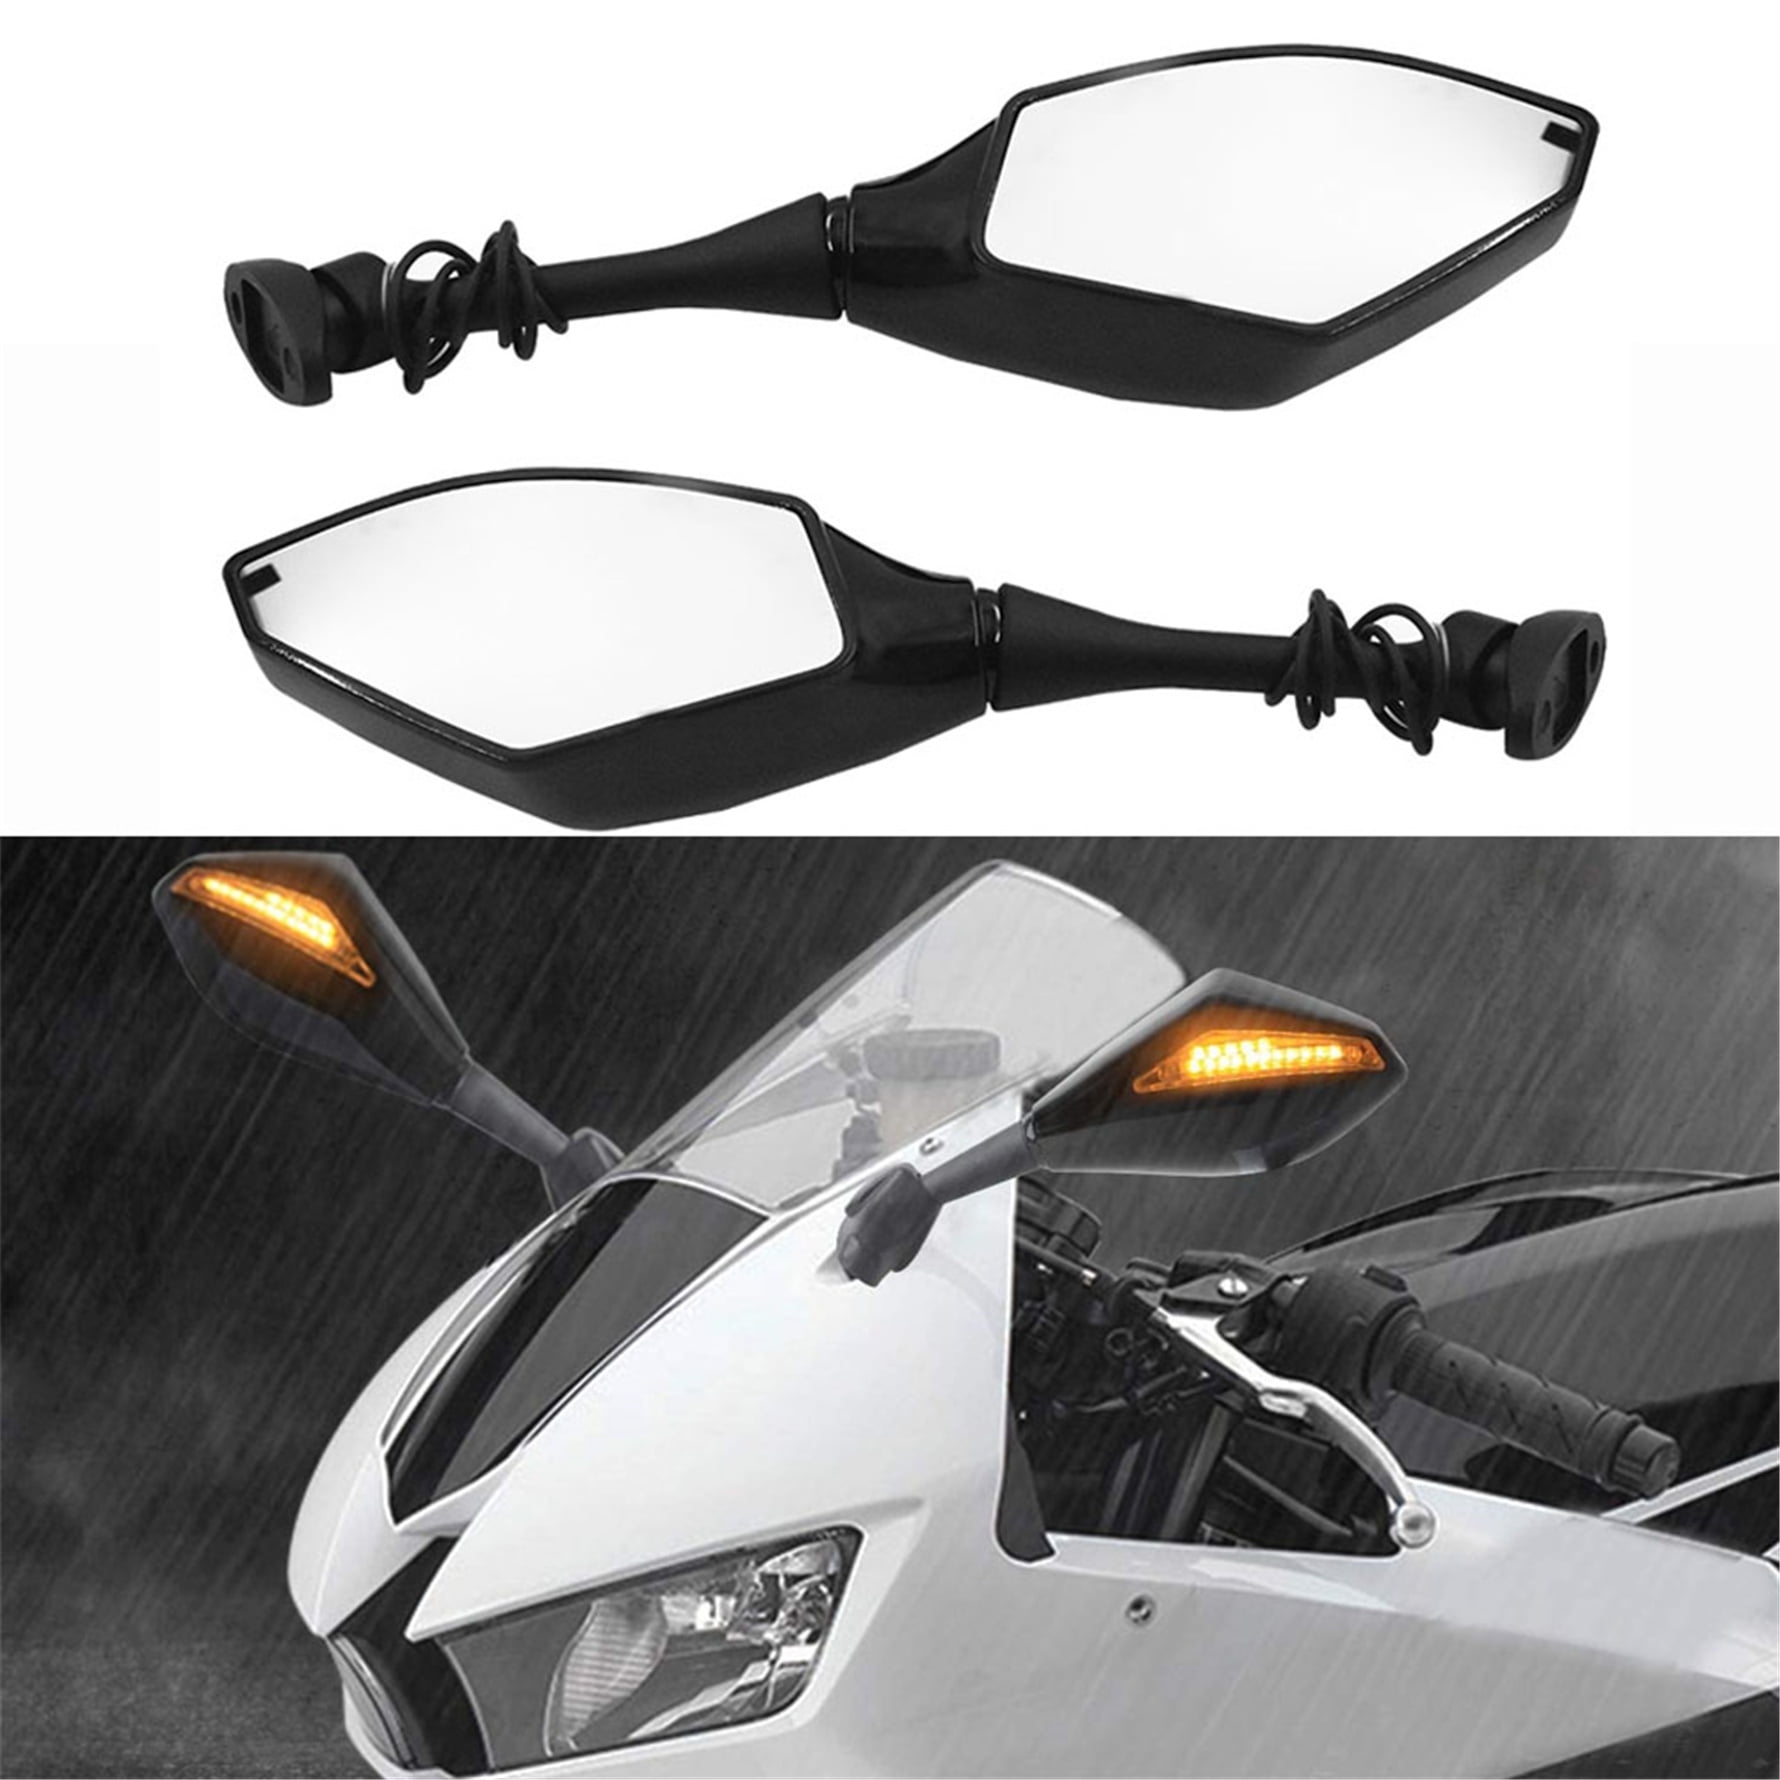 AMBER LED TURN SIGNAL INTEGRATED MIRRORS MOTORCYCLE UNIVERSAL BLACK REAR VIEW US 